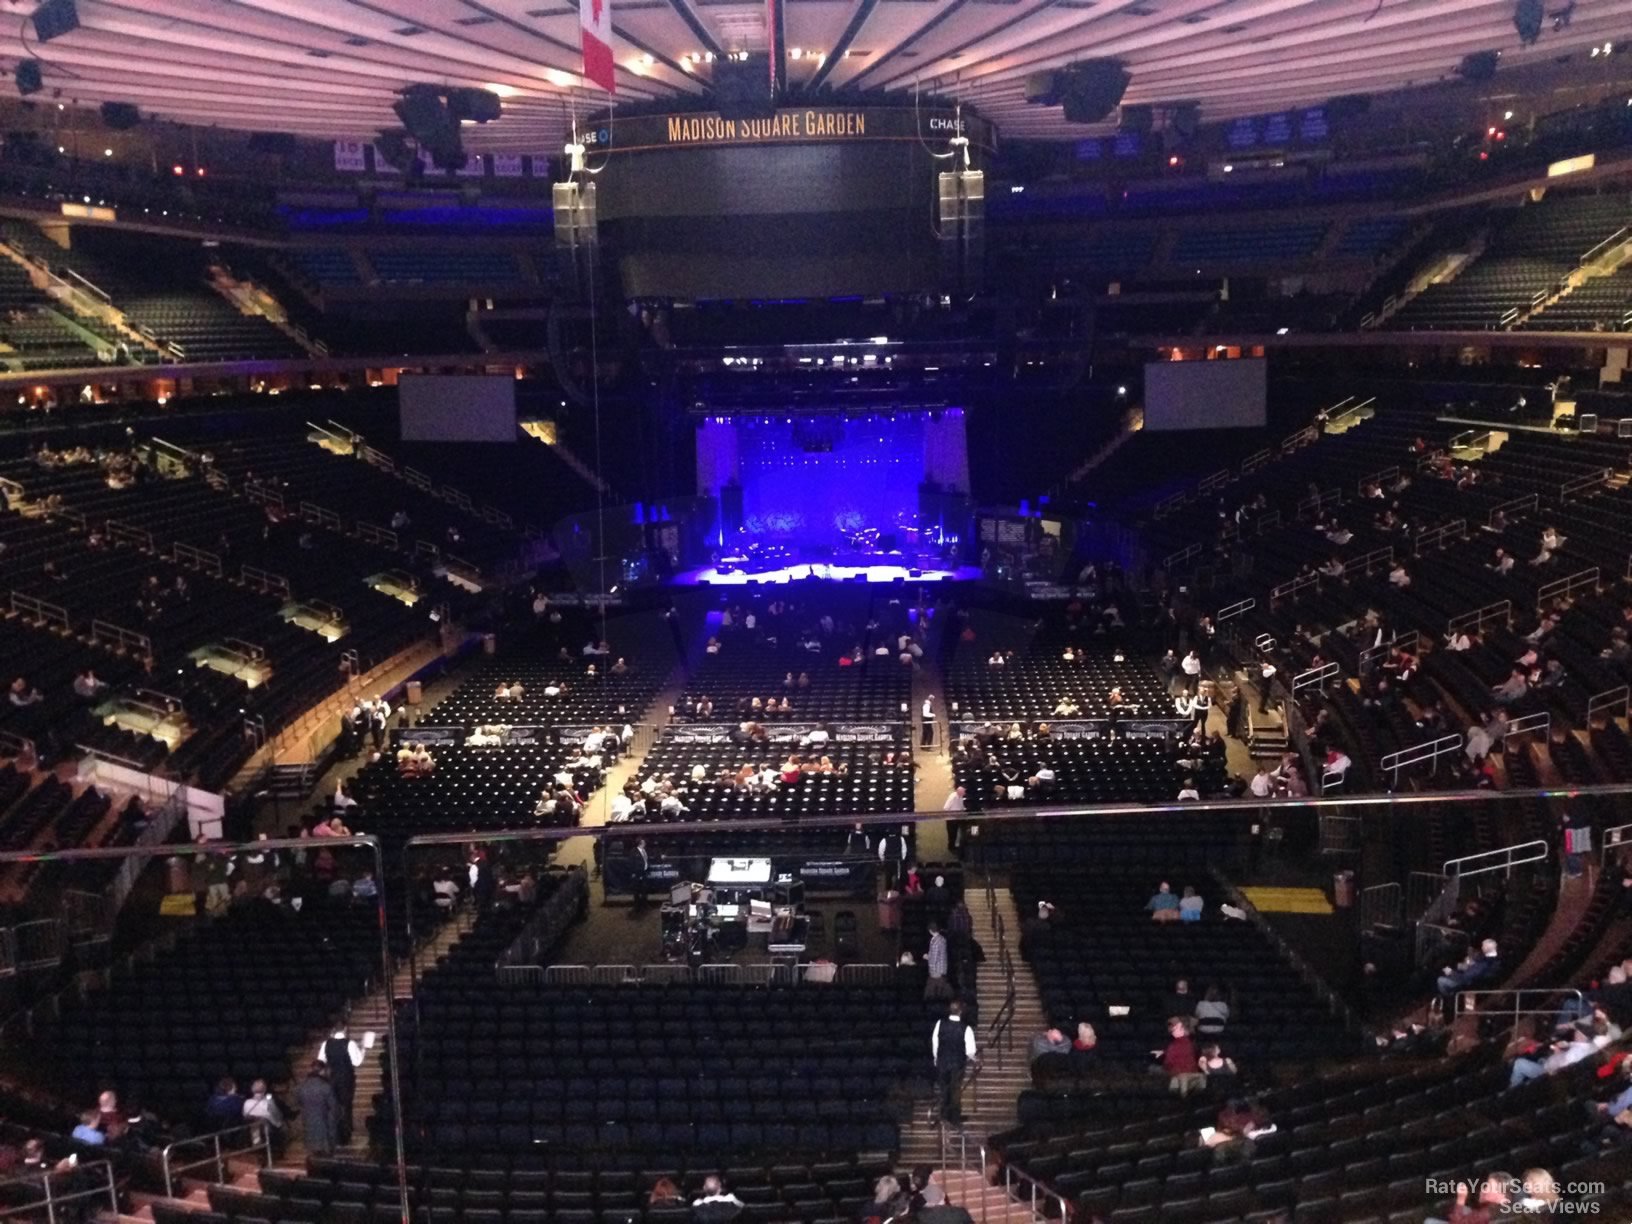 Best Seats For Madison Square Garden Concert